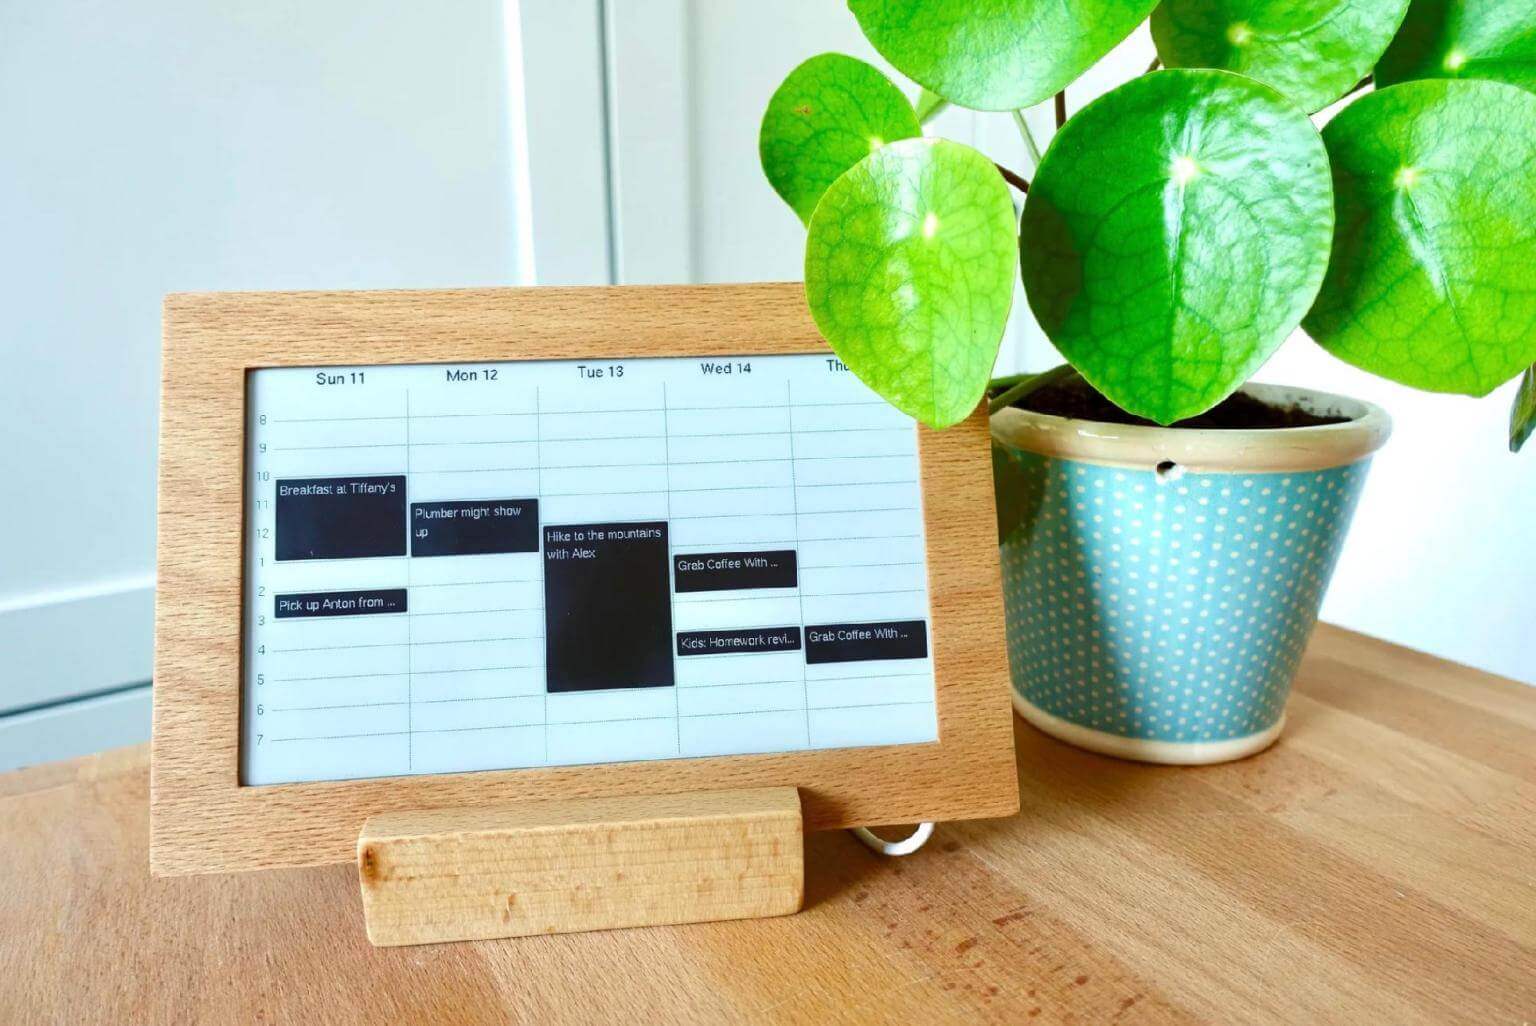 The E Ink Invisible Calendar syncs with and displays your Google